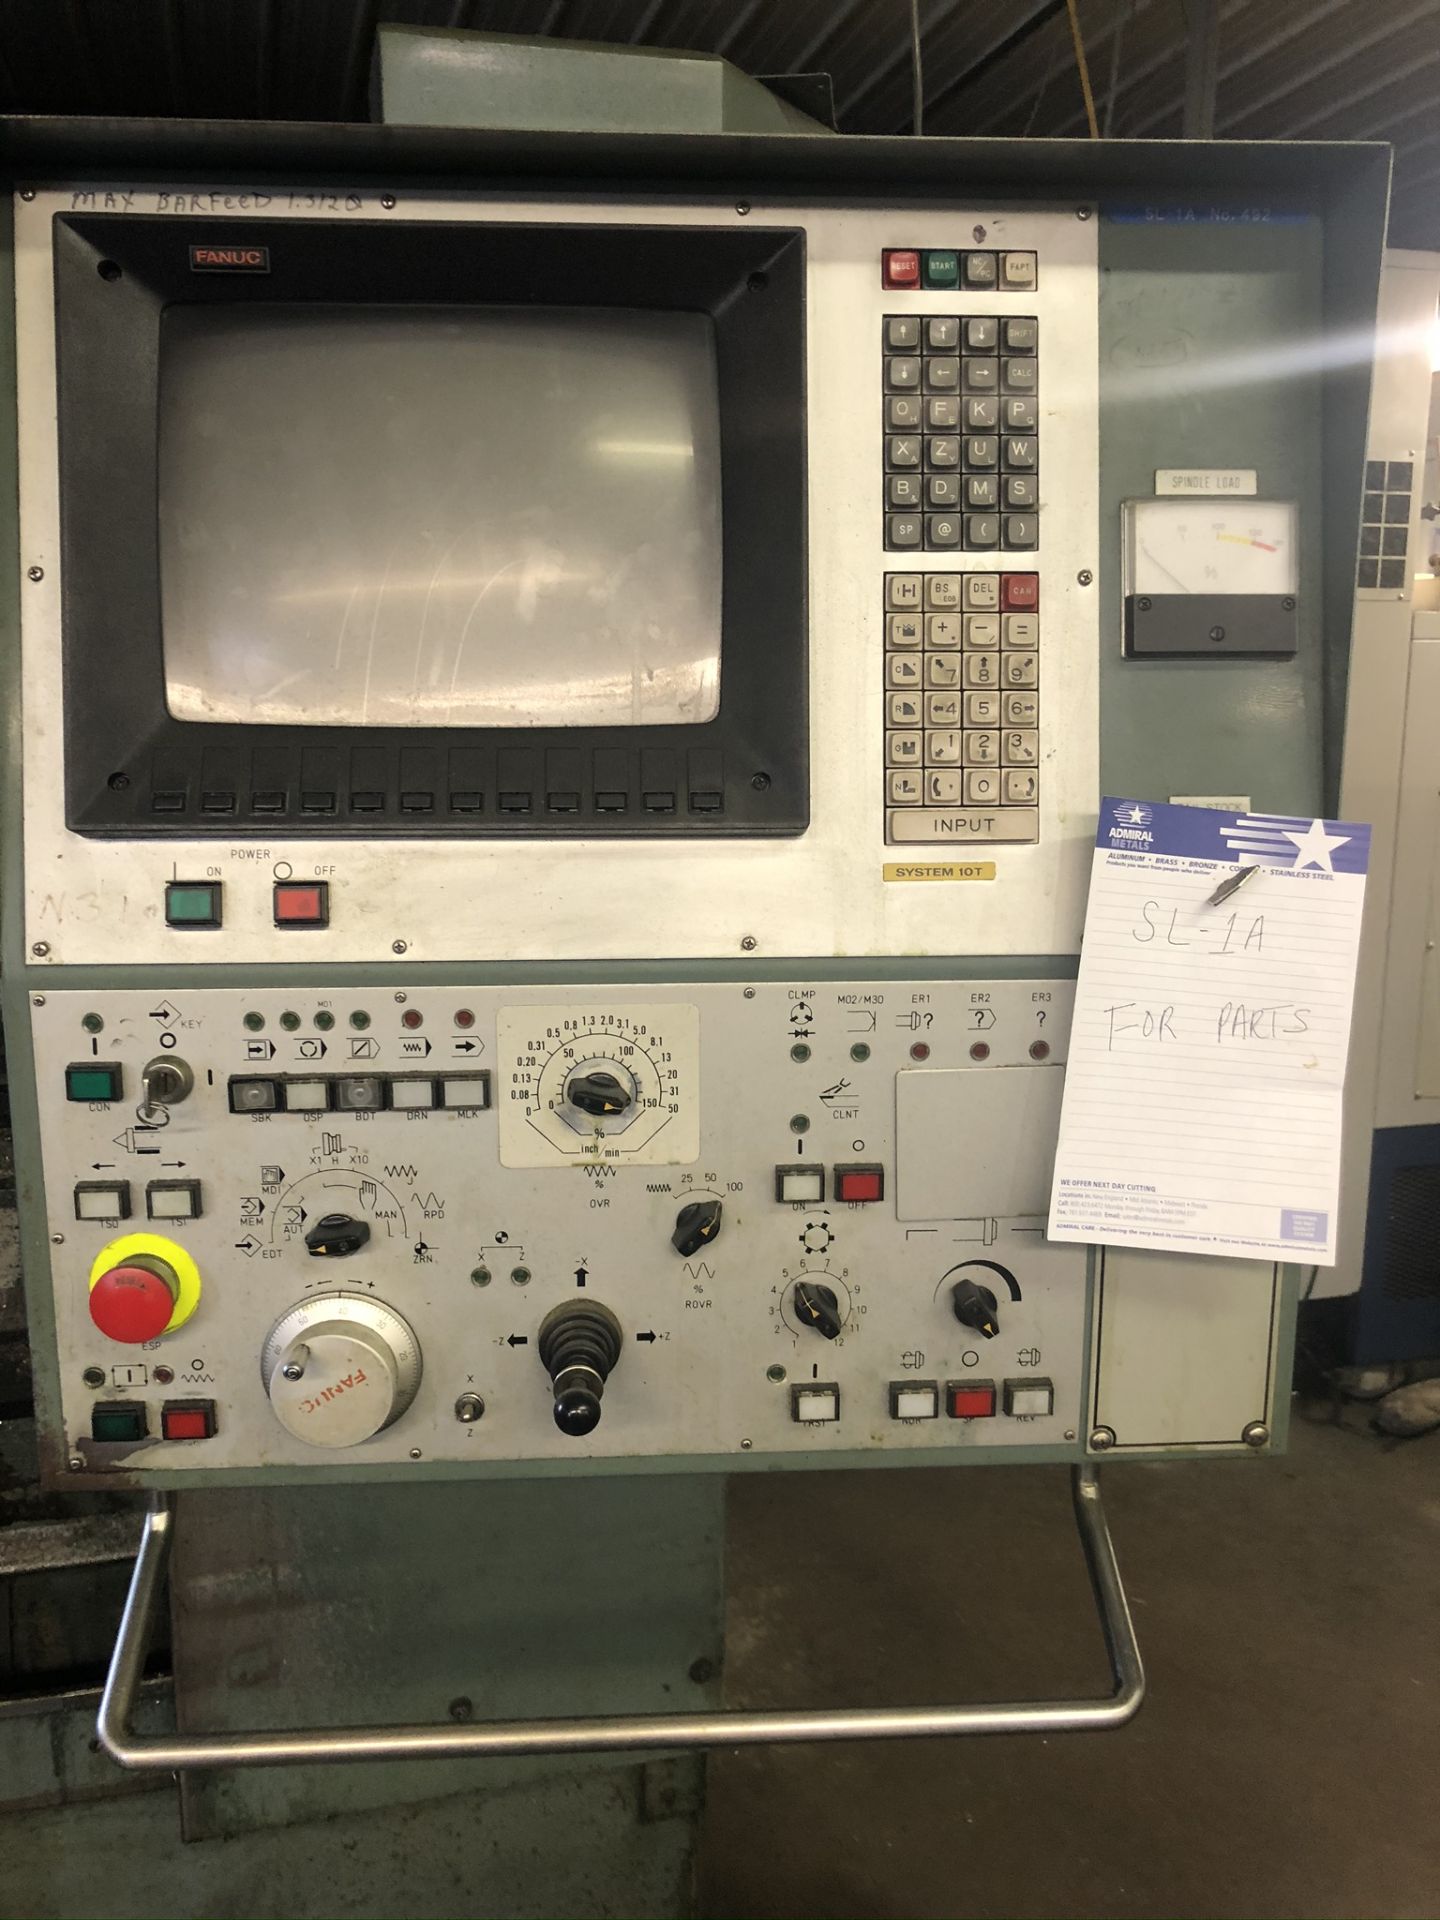 Mori Seiki Model SL-1A CNC Lathe S/N 492 Equipped with Fanuc 10T CNC Control, - Image 3 of 4